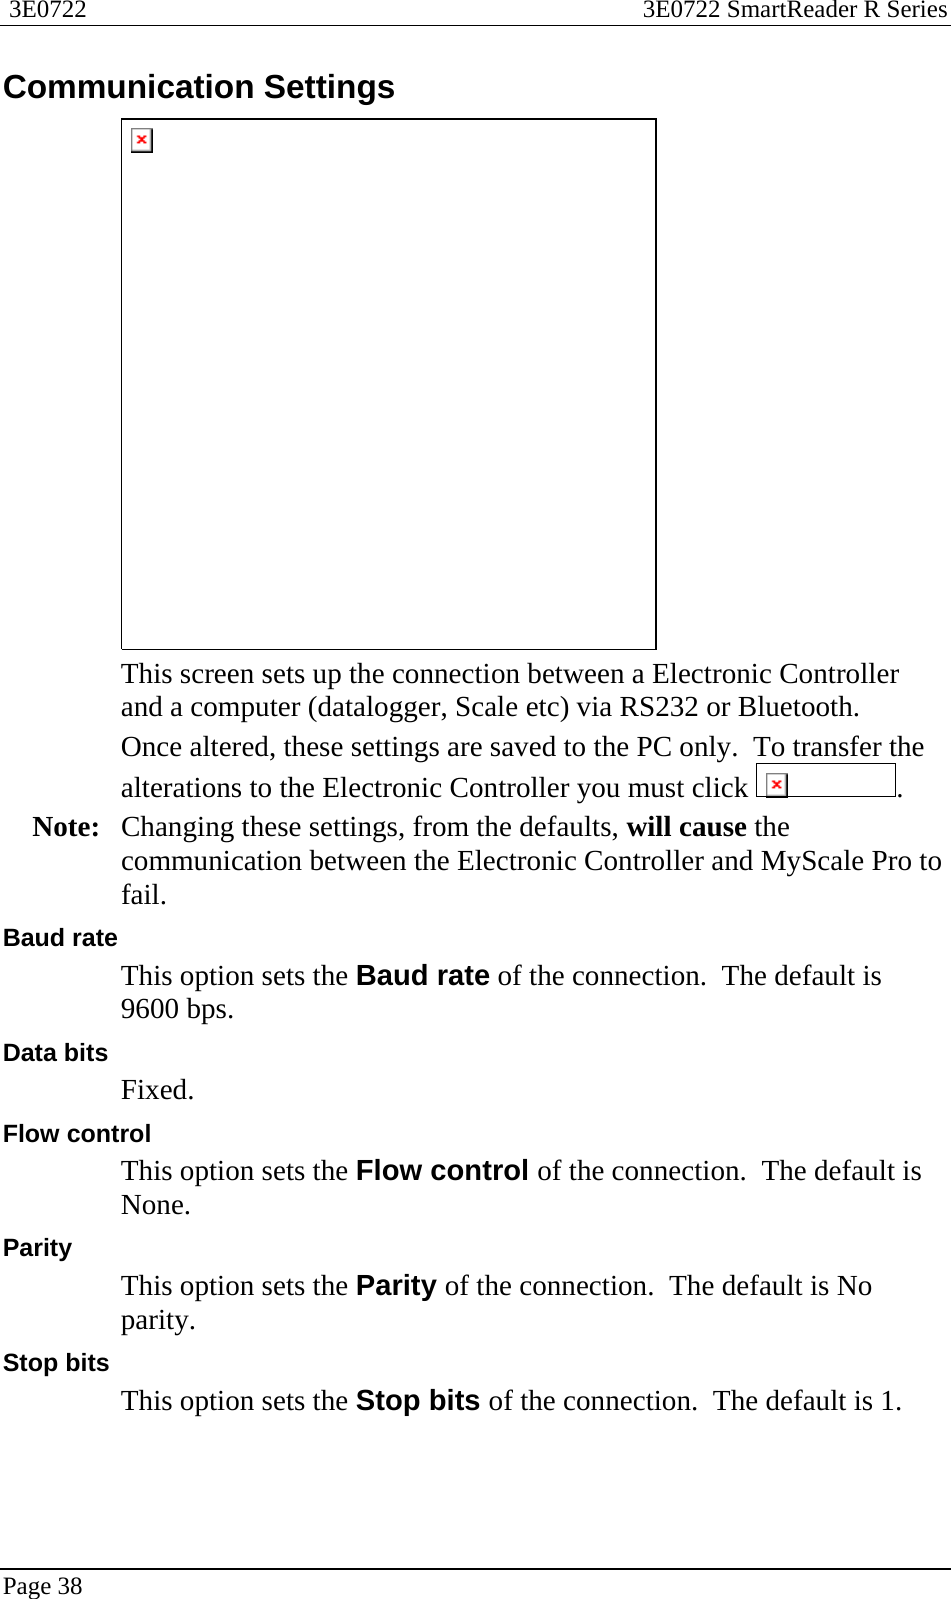  3E0722  3E0722 SmartReader R Series  Page 38  Communication Settings  This screen sets up the connection between a Electronic Controller and a computer (datalogger, Scale etc) via RS232 or Bluetooth.   Once altered, these settings are saved to the PC only.  To transfer the alterations to the Electronic Controller you must click  . Note:  Changing these settings, from the defaults, will cause the communication between the Electronic Controller and MyScale Pro to fail. Baud rate This option sets the Baud rate of the connection.  The default is 9600 bps. Data bits Fixed. Flow control This option sets the Flow control of the connection.  The default is None. Parity This option sets the Parity of the connection.  The default is No parity. Stop bits This option sets the Stop bits of the connection.  The default is 1.  